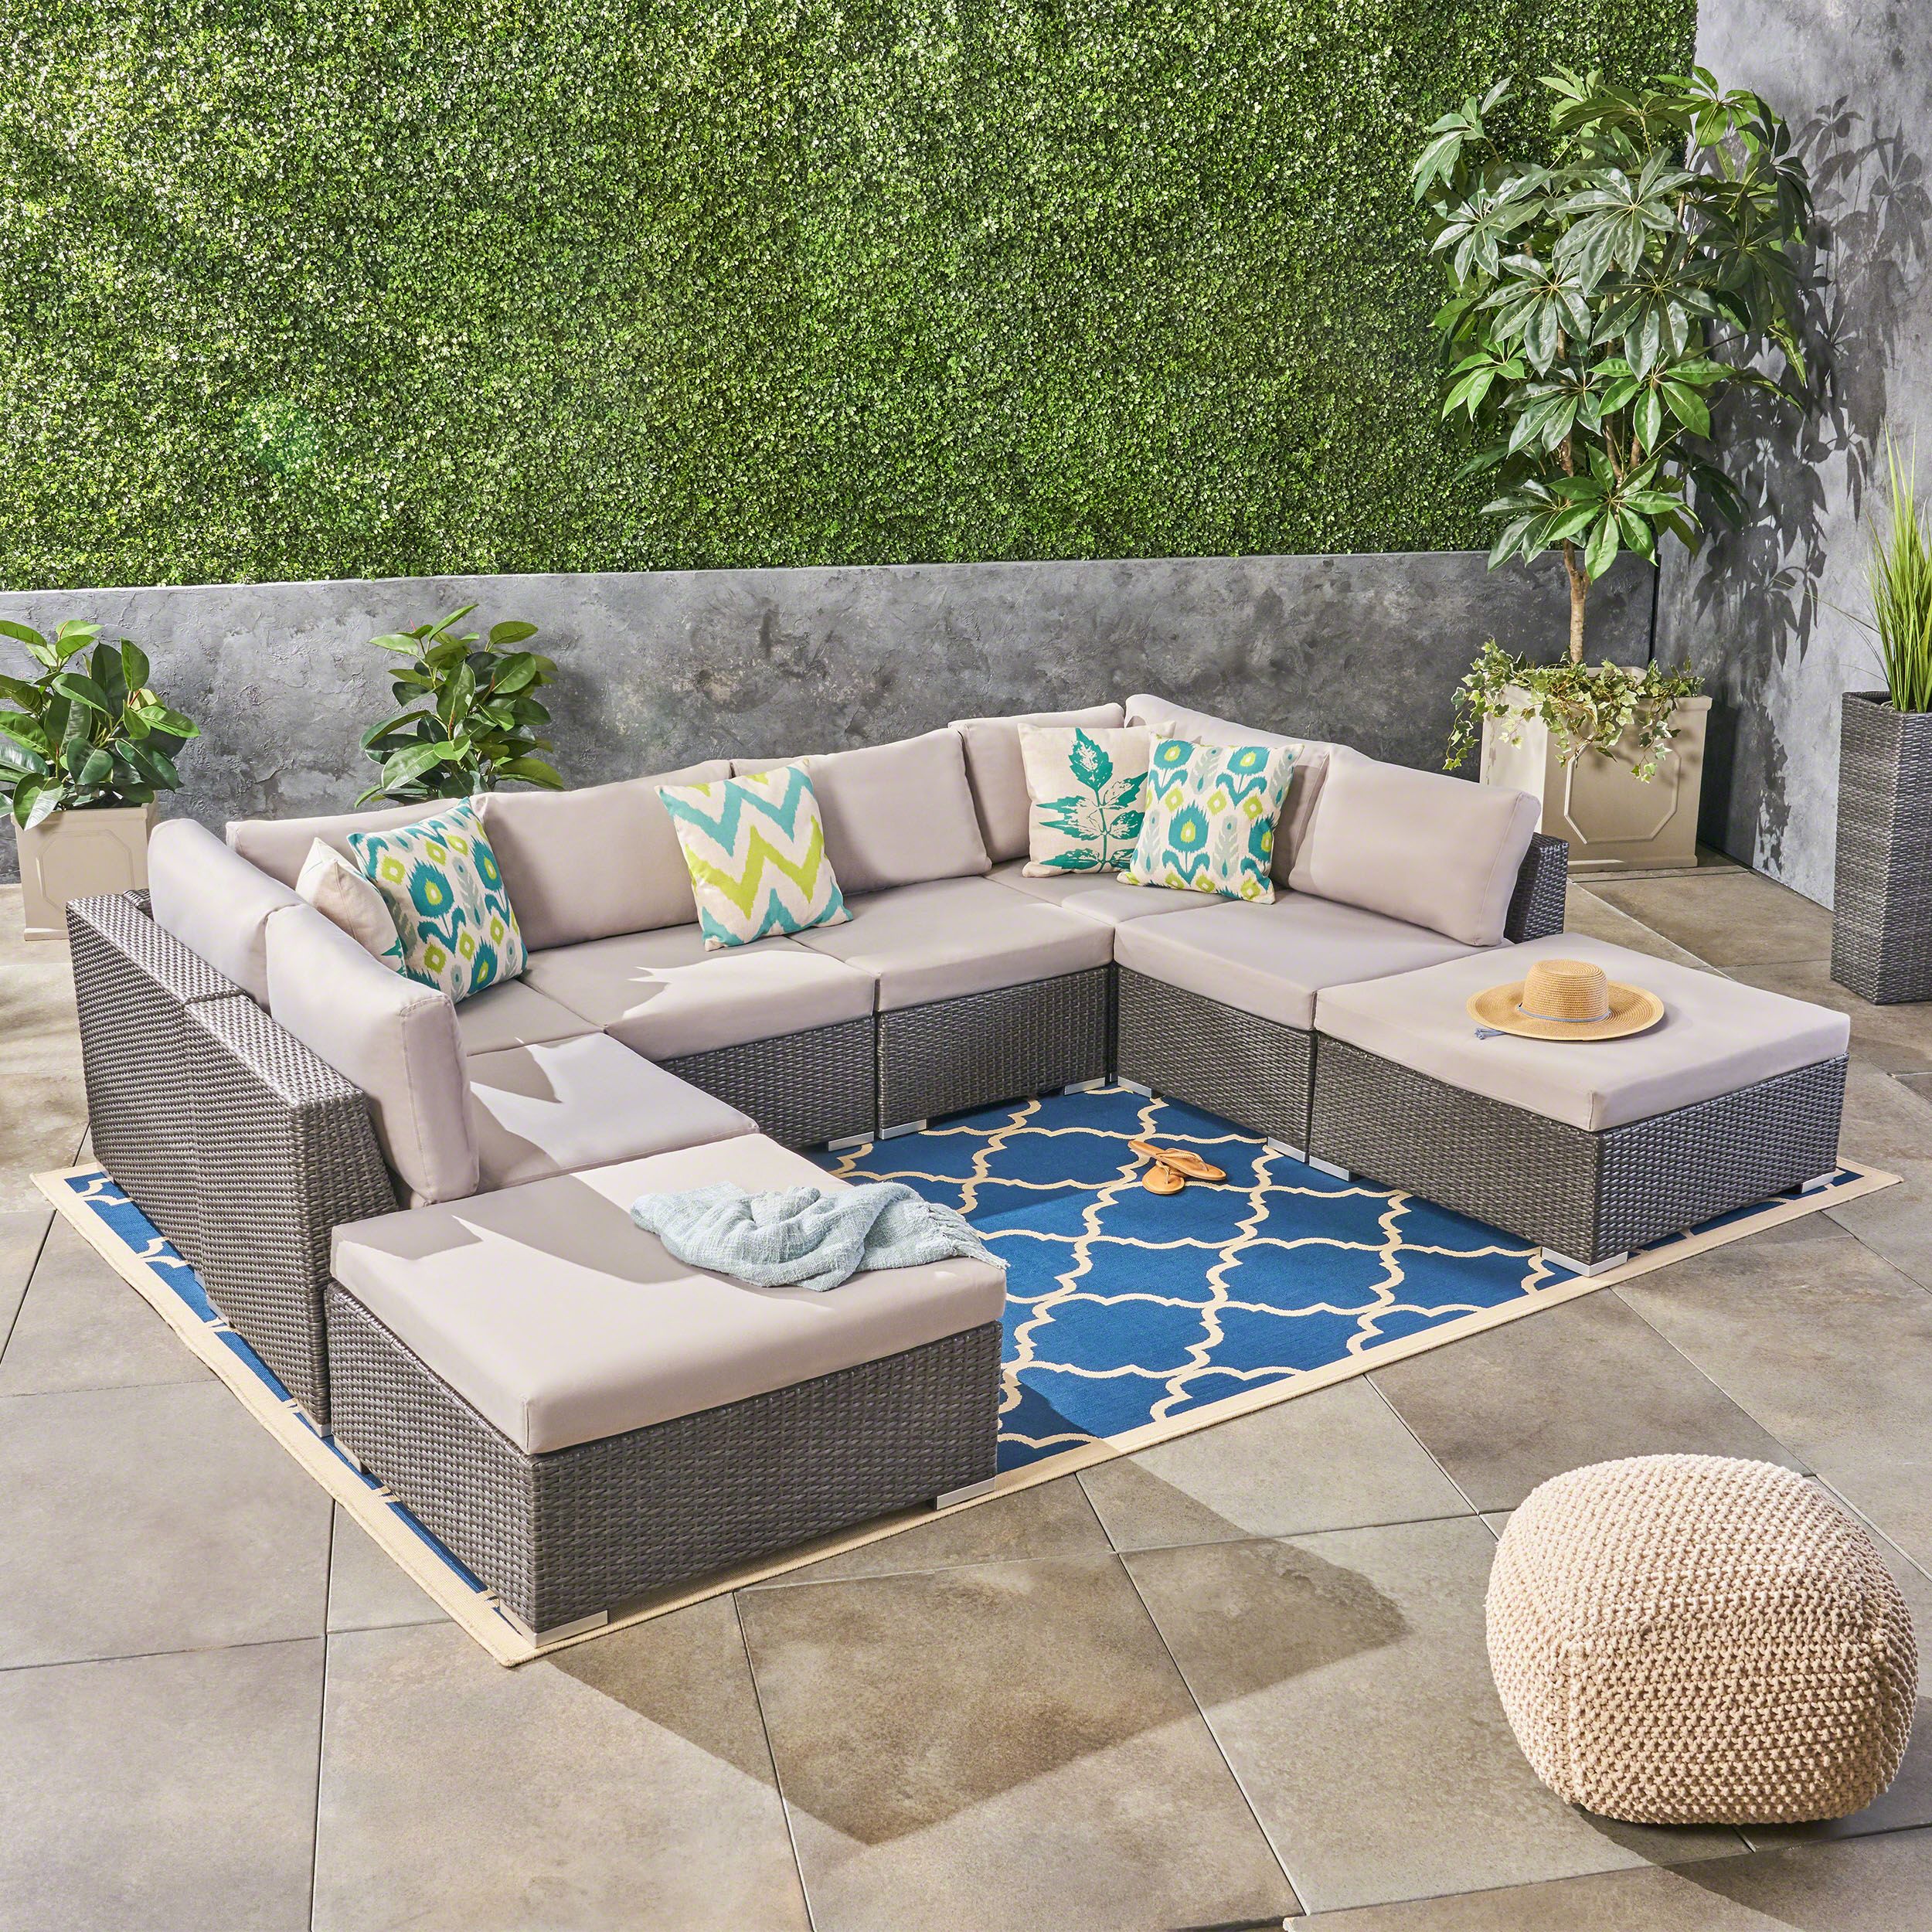 Ameer Outdoor 8 Piece Wicker Sectional Set With Cushions, Grey, Silver - image 1 of 5